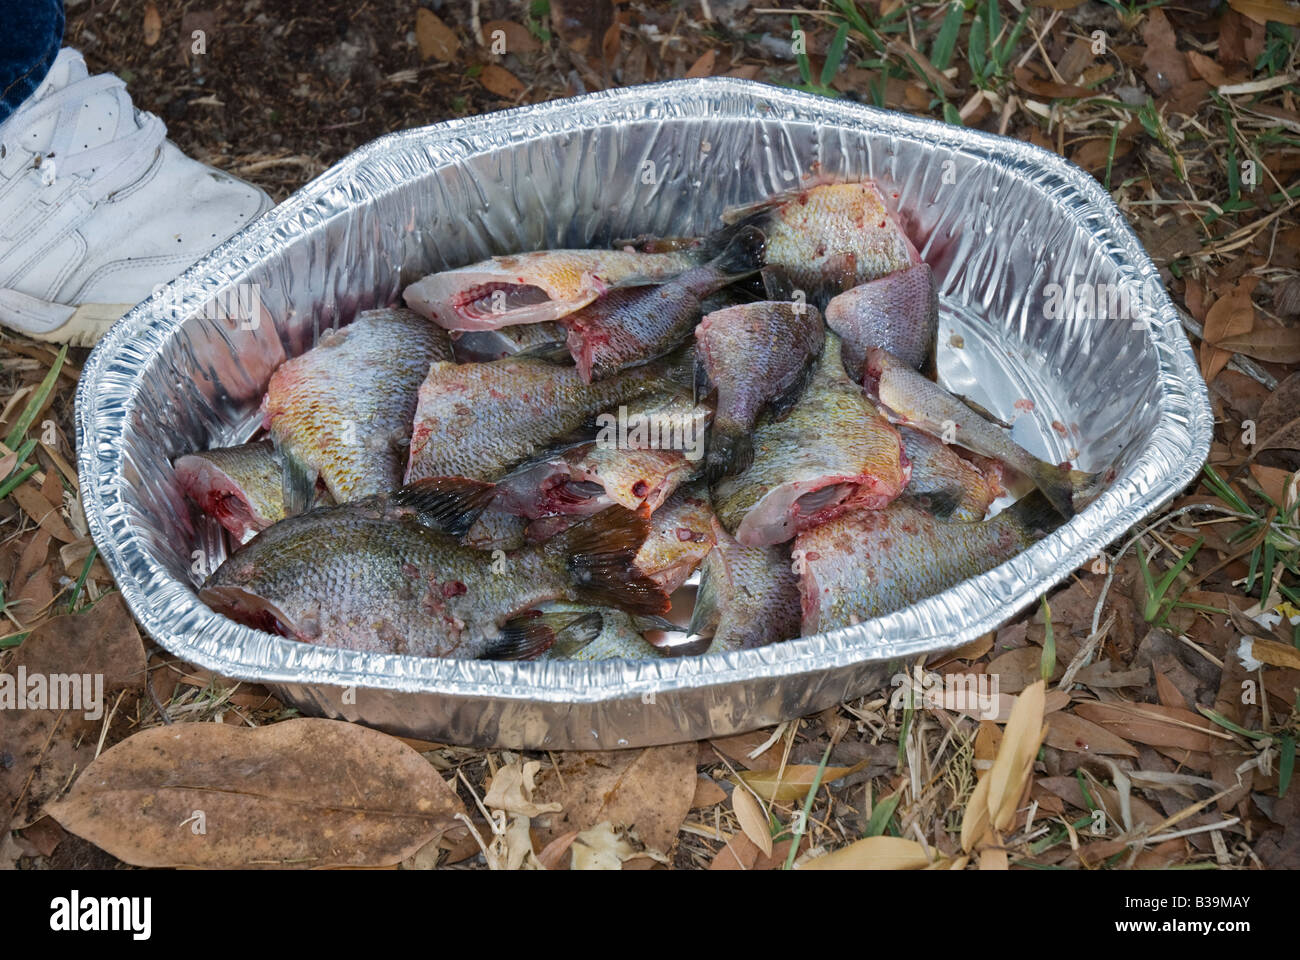 cleaned fish ready for frying from Suwannee River North Florida Stock Photo